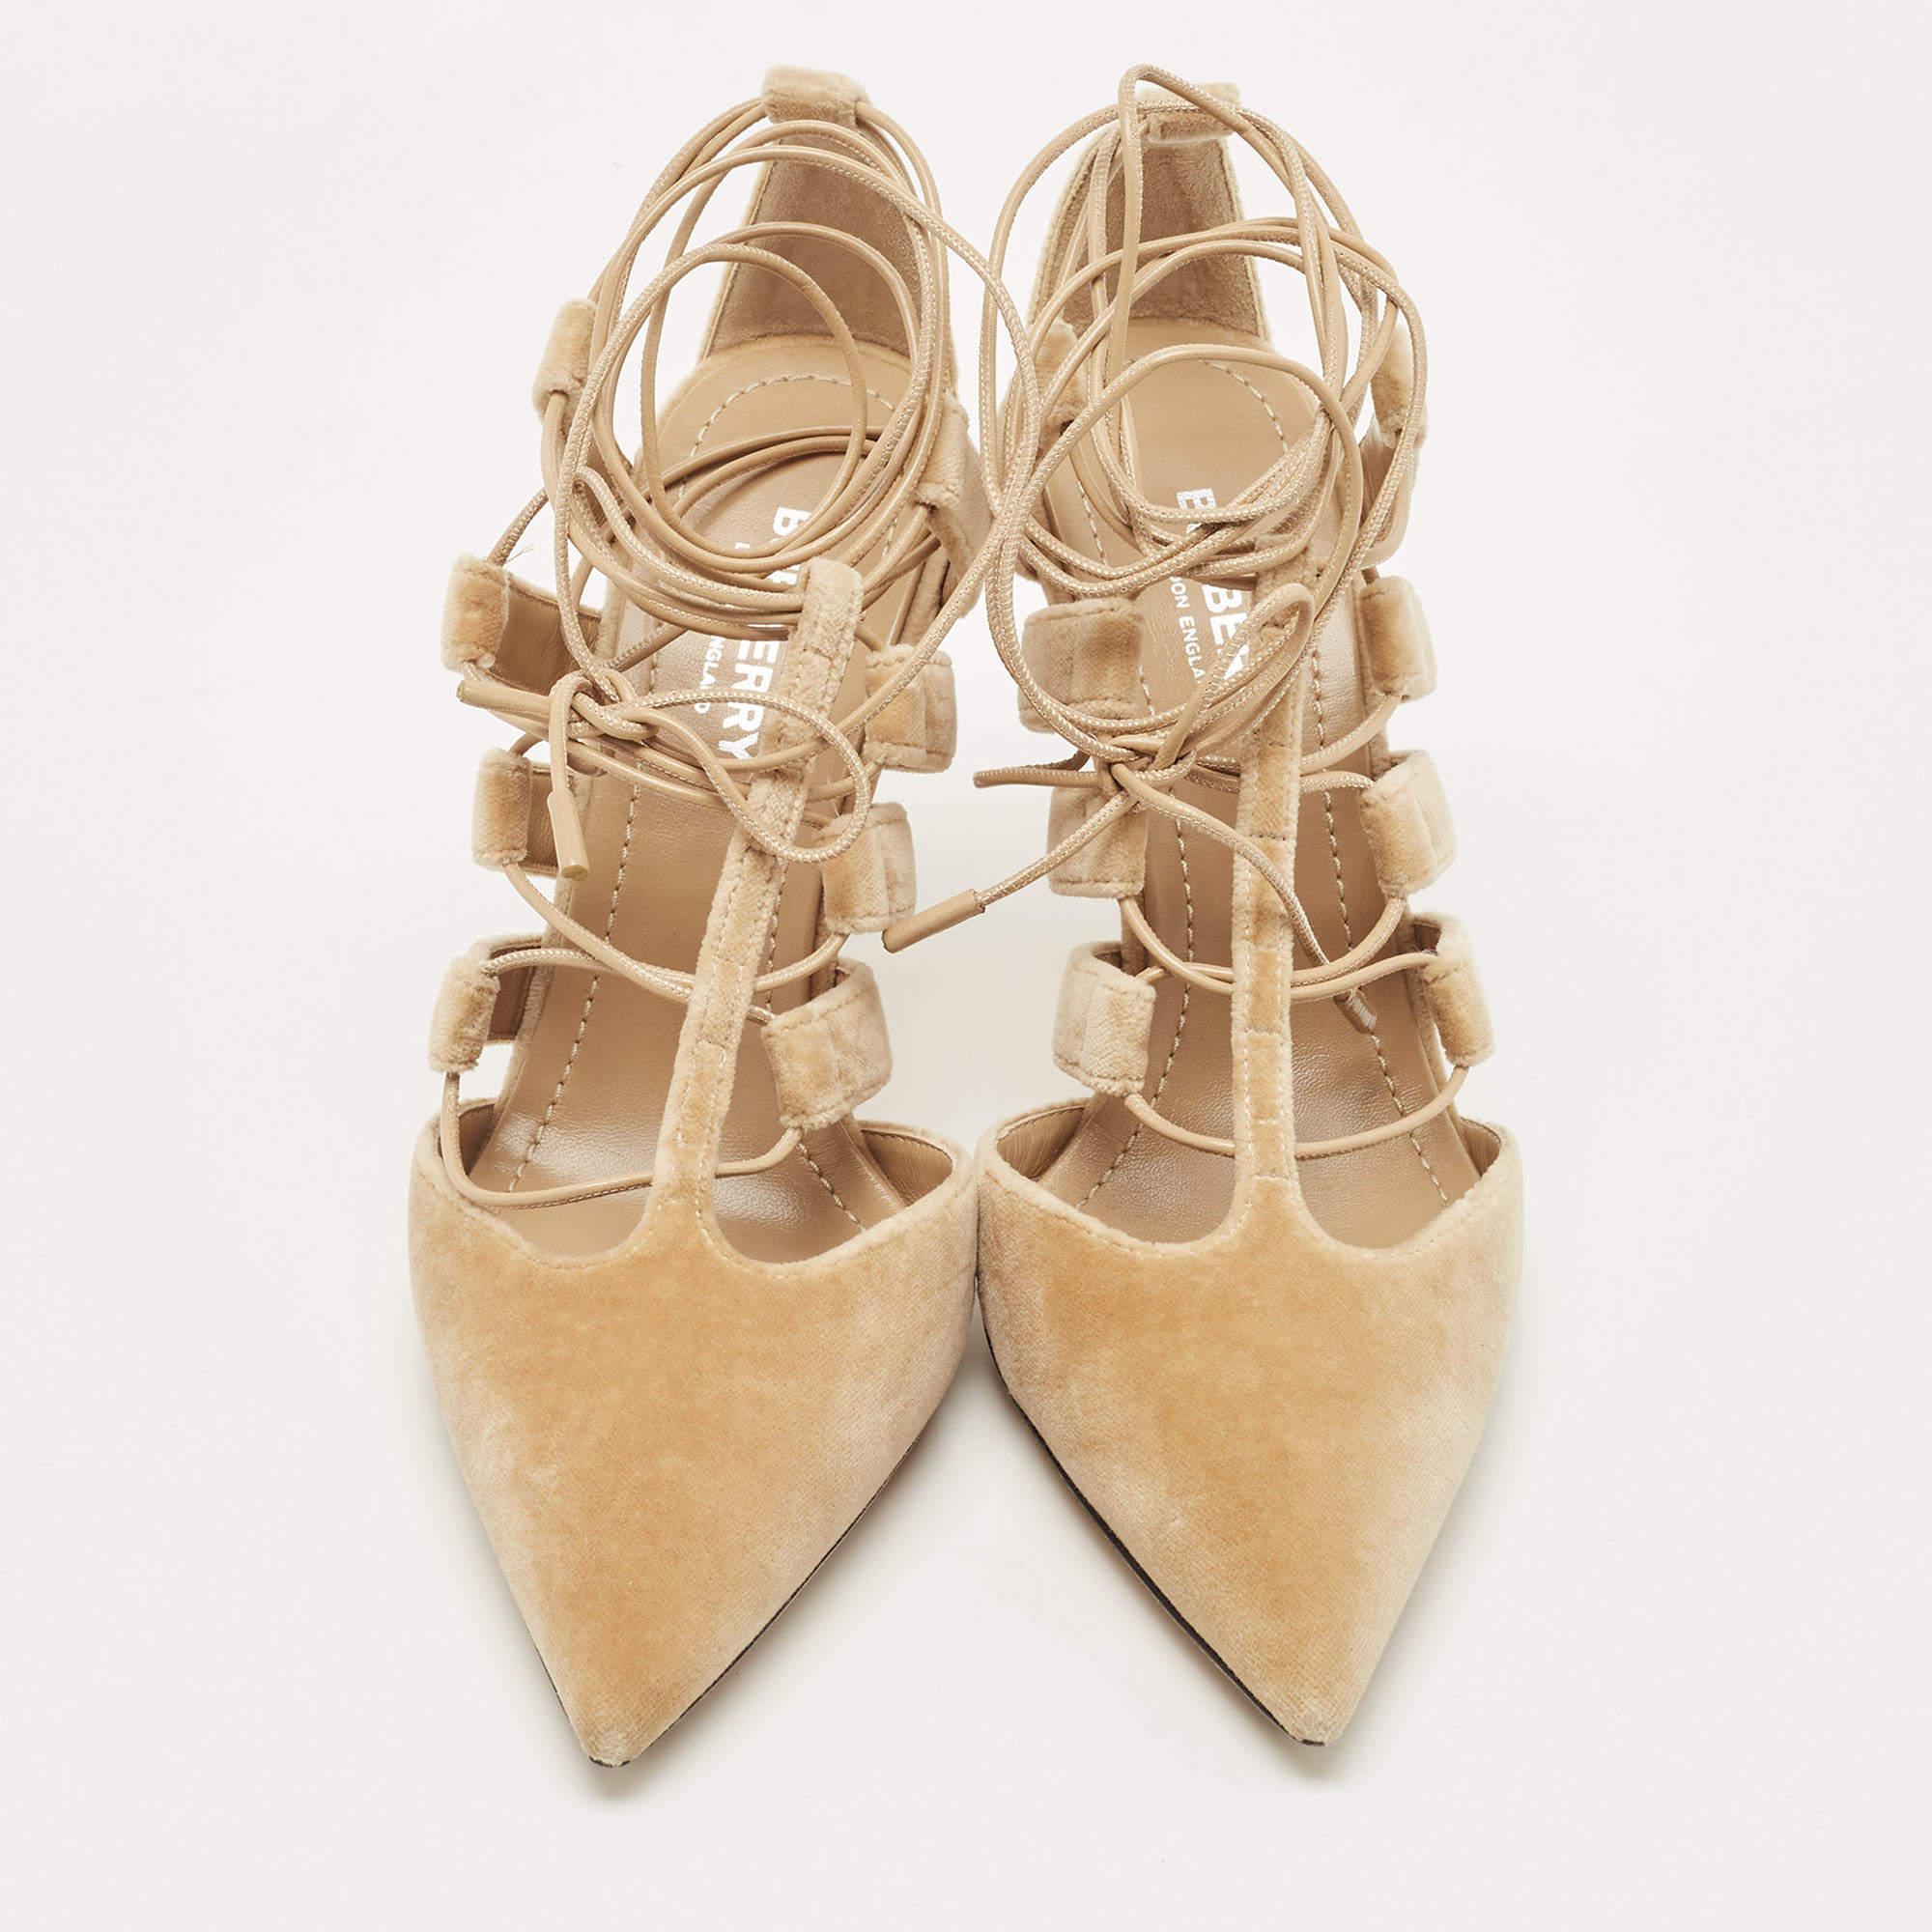 Burberry Beige Velvet Strappy Pointed Toe Ankle Wrap Pumps Size 37 1